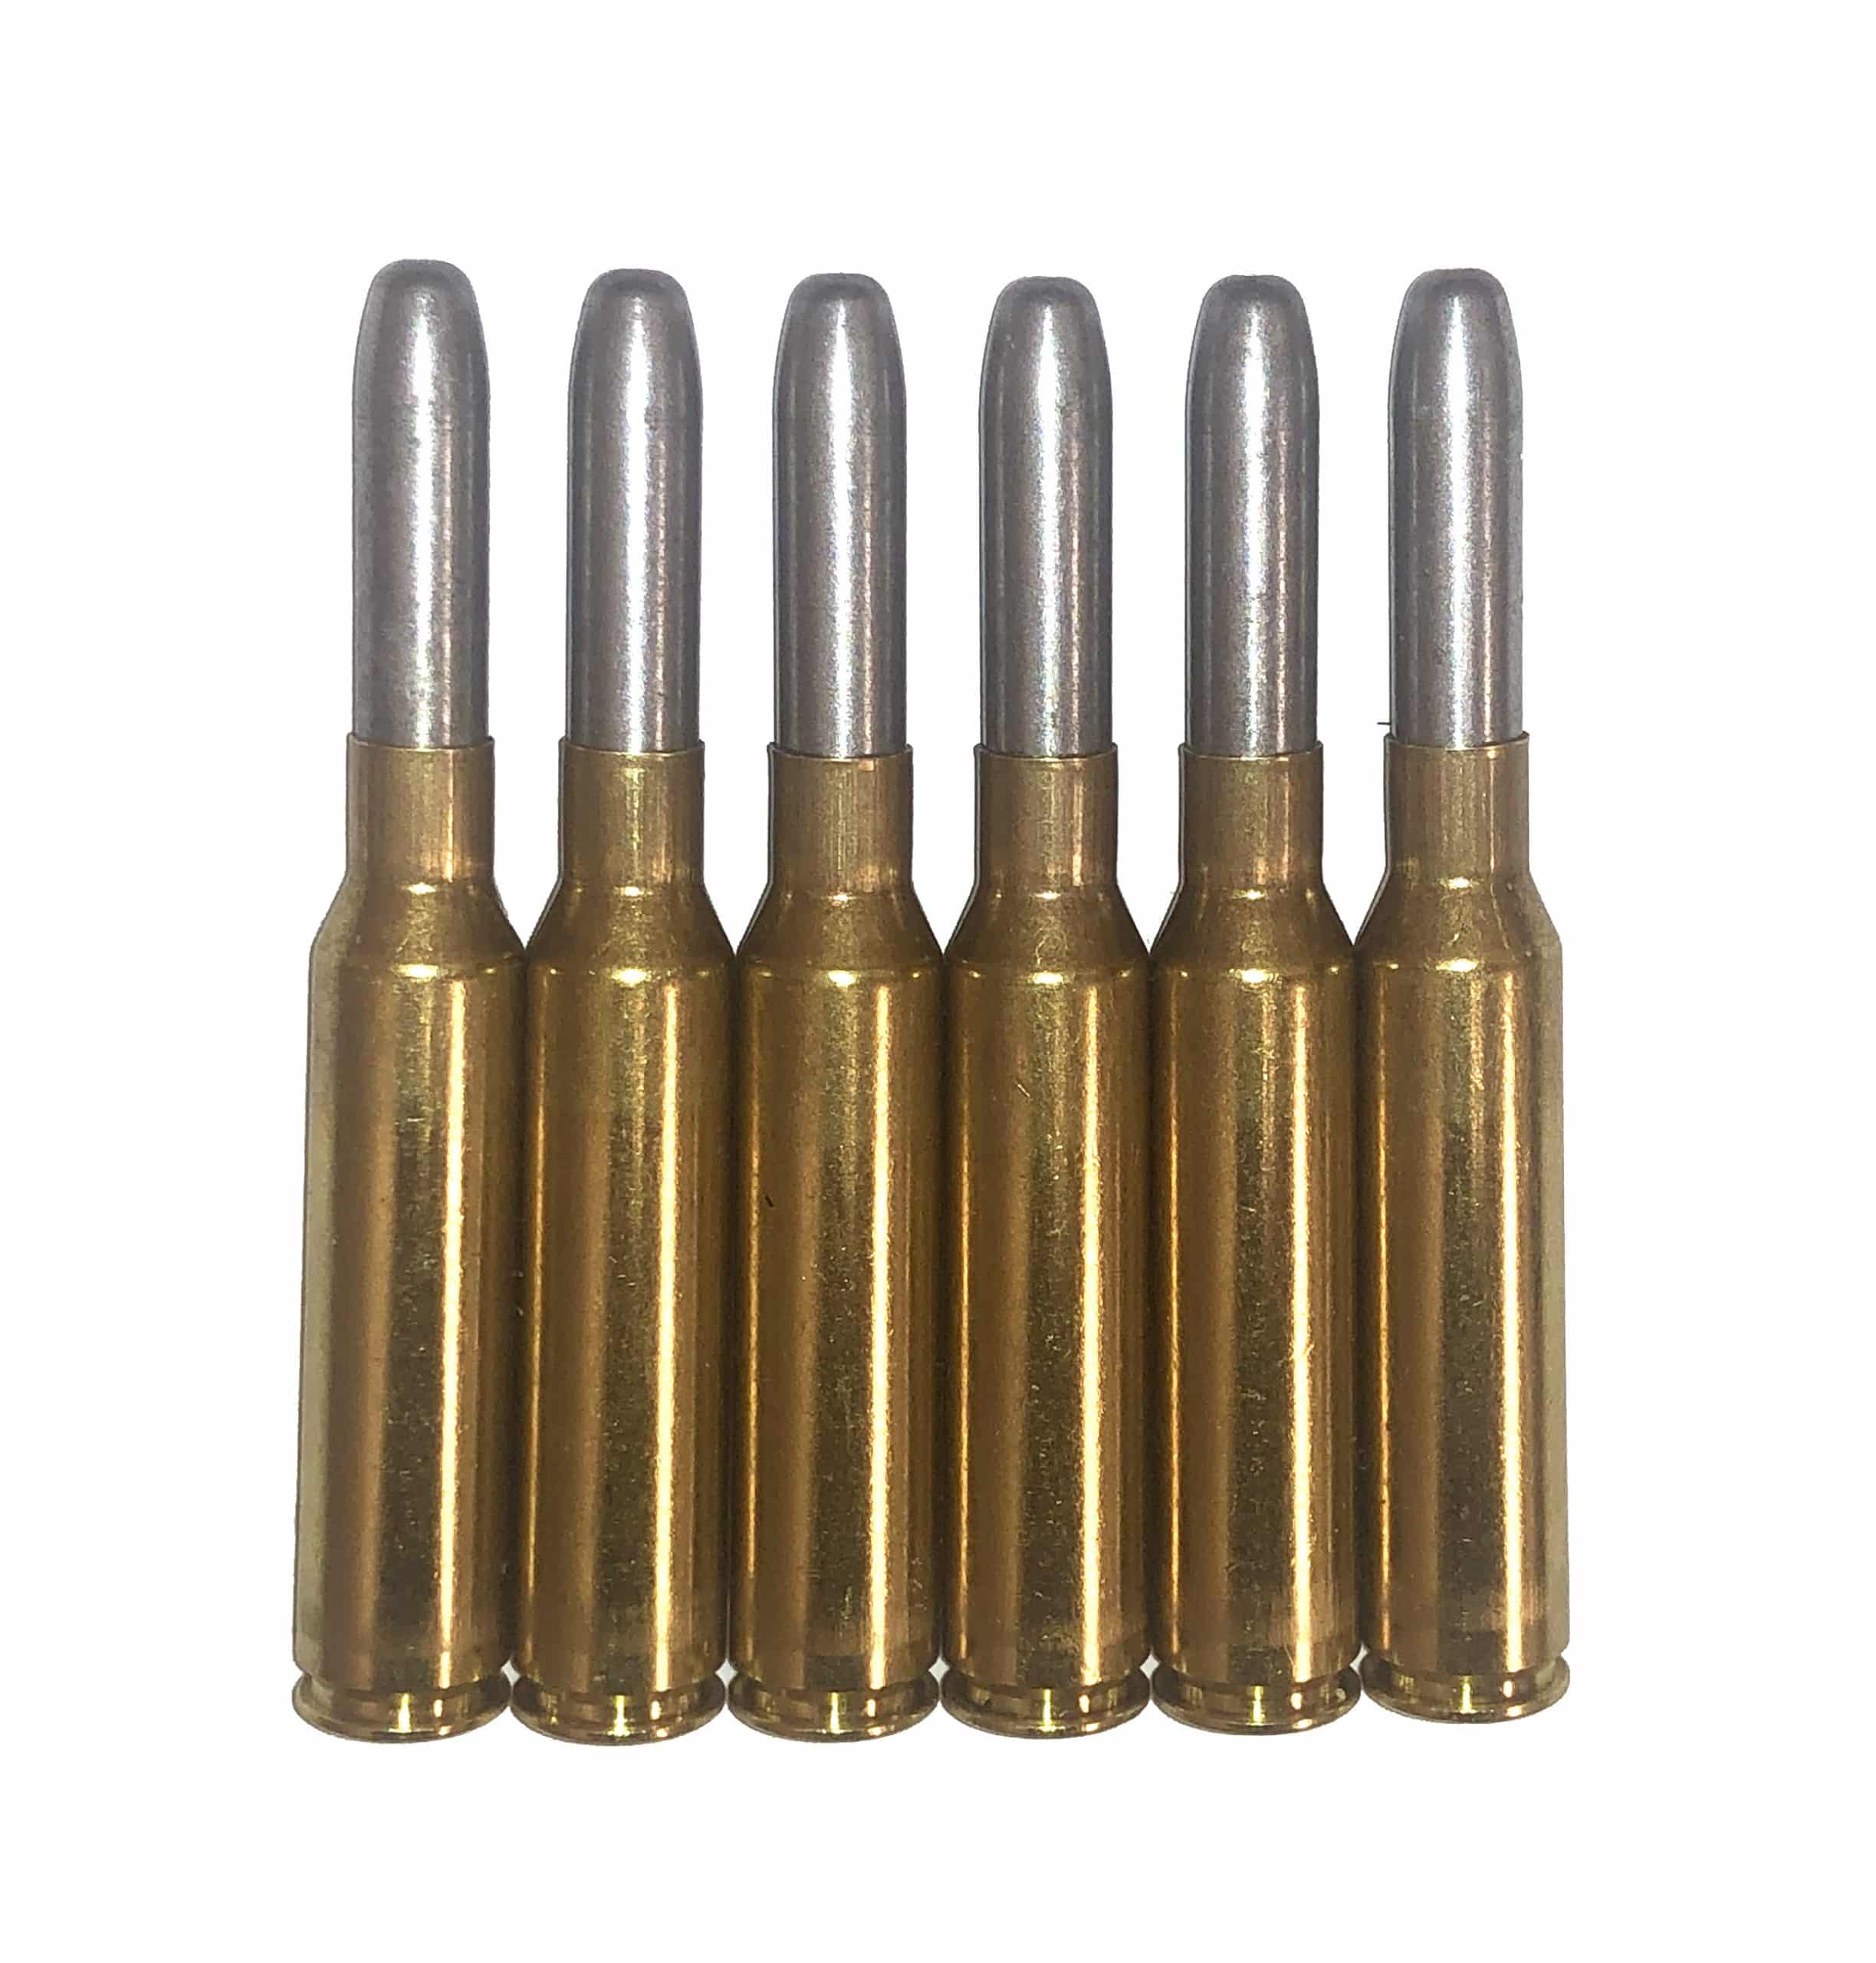 6.5x52 Carcano Dummy Rounds Snap Caps Fake Bullets